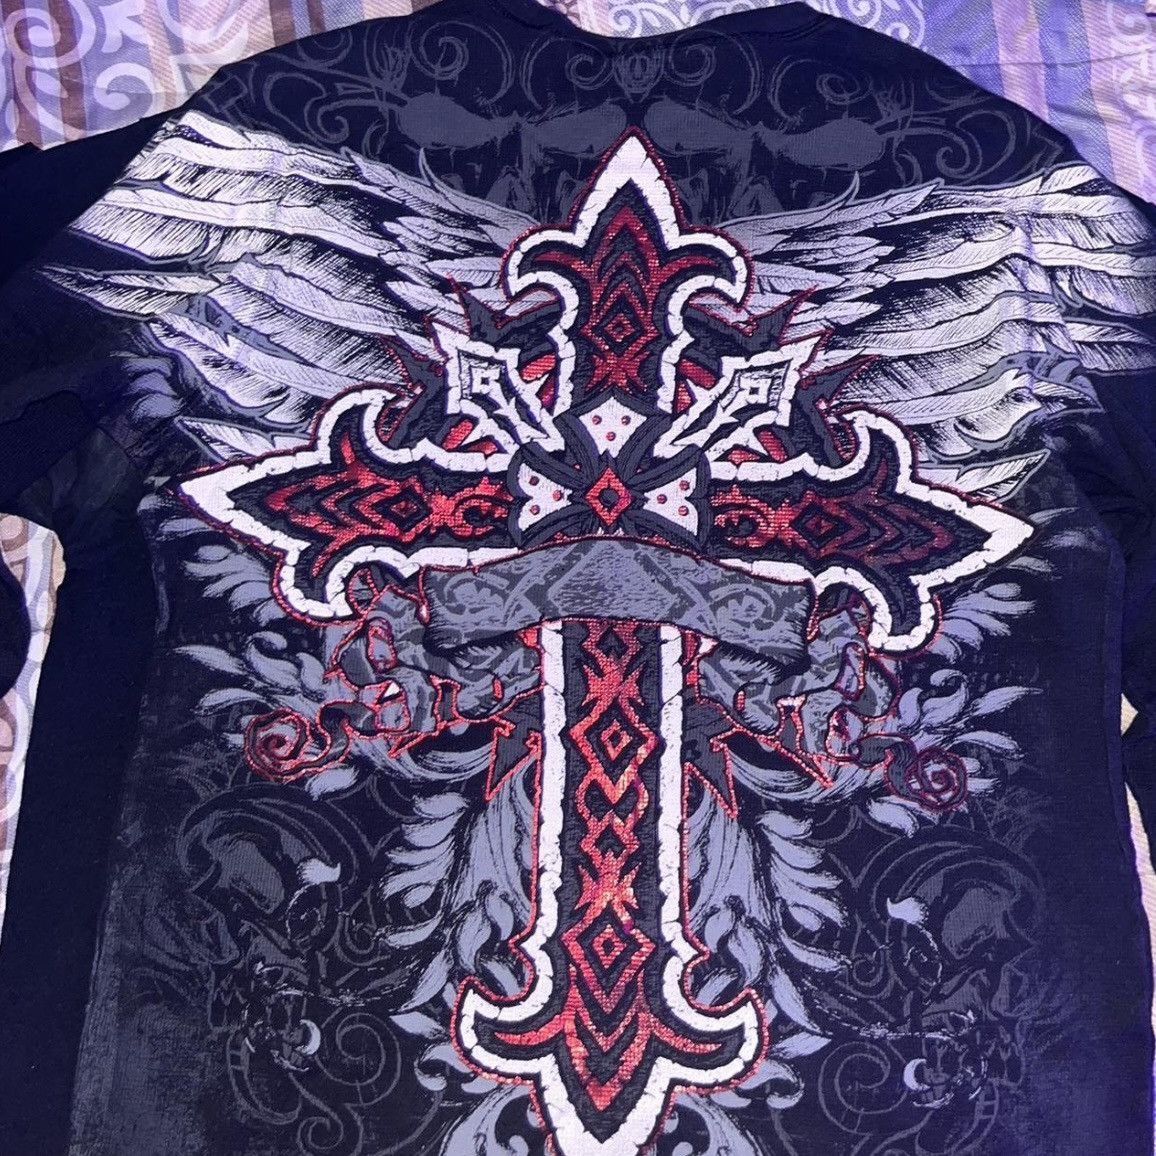 Affliction Archaic Affliction Thermal Size US XXL / EU 58 / 5 - 2 Preview